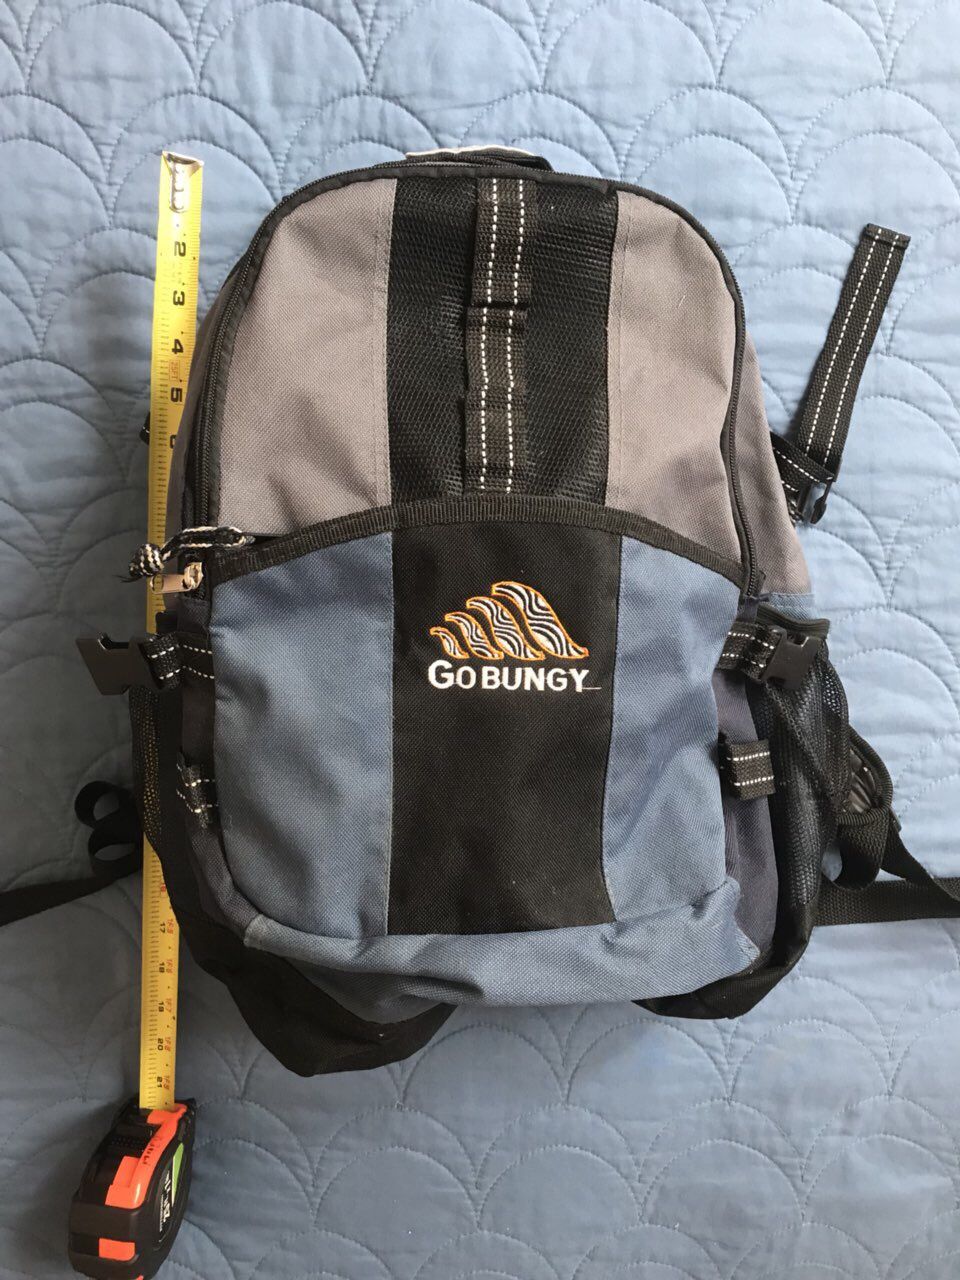 Backpack-excellent condition